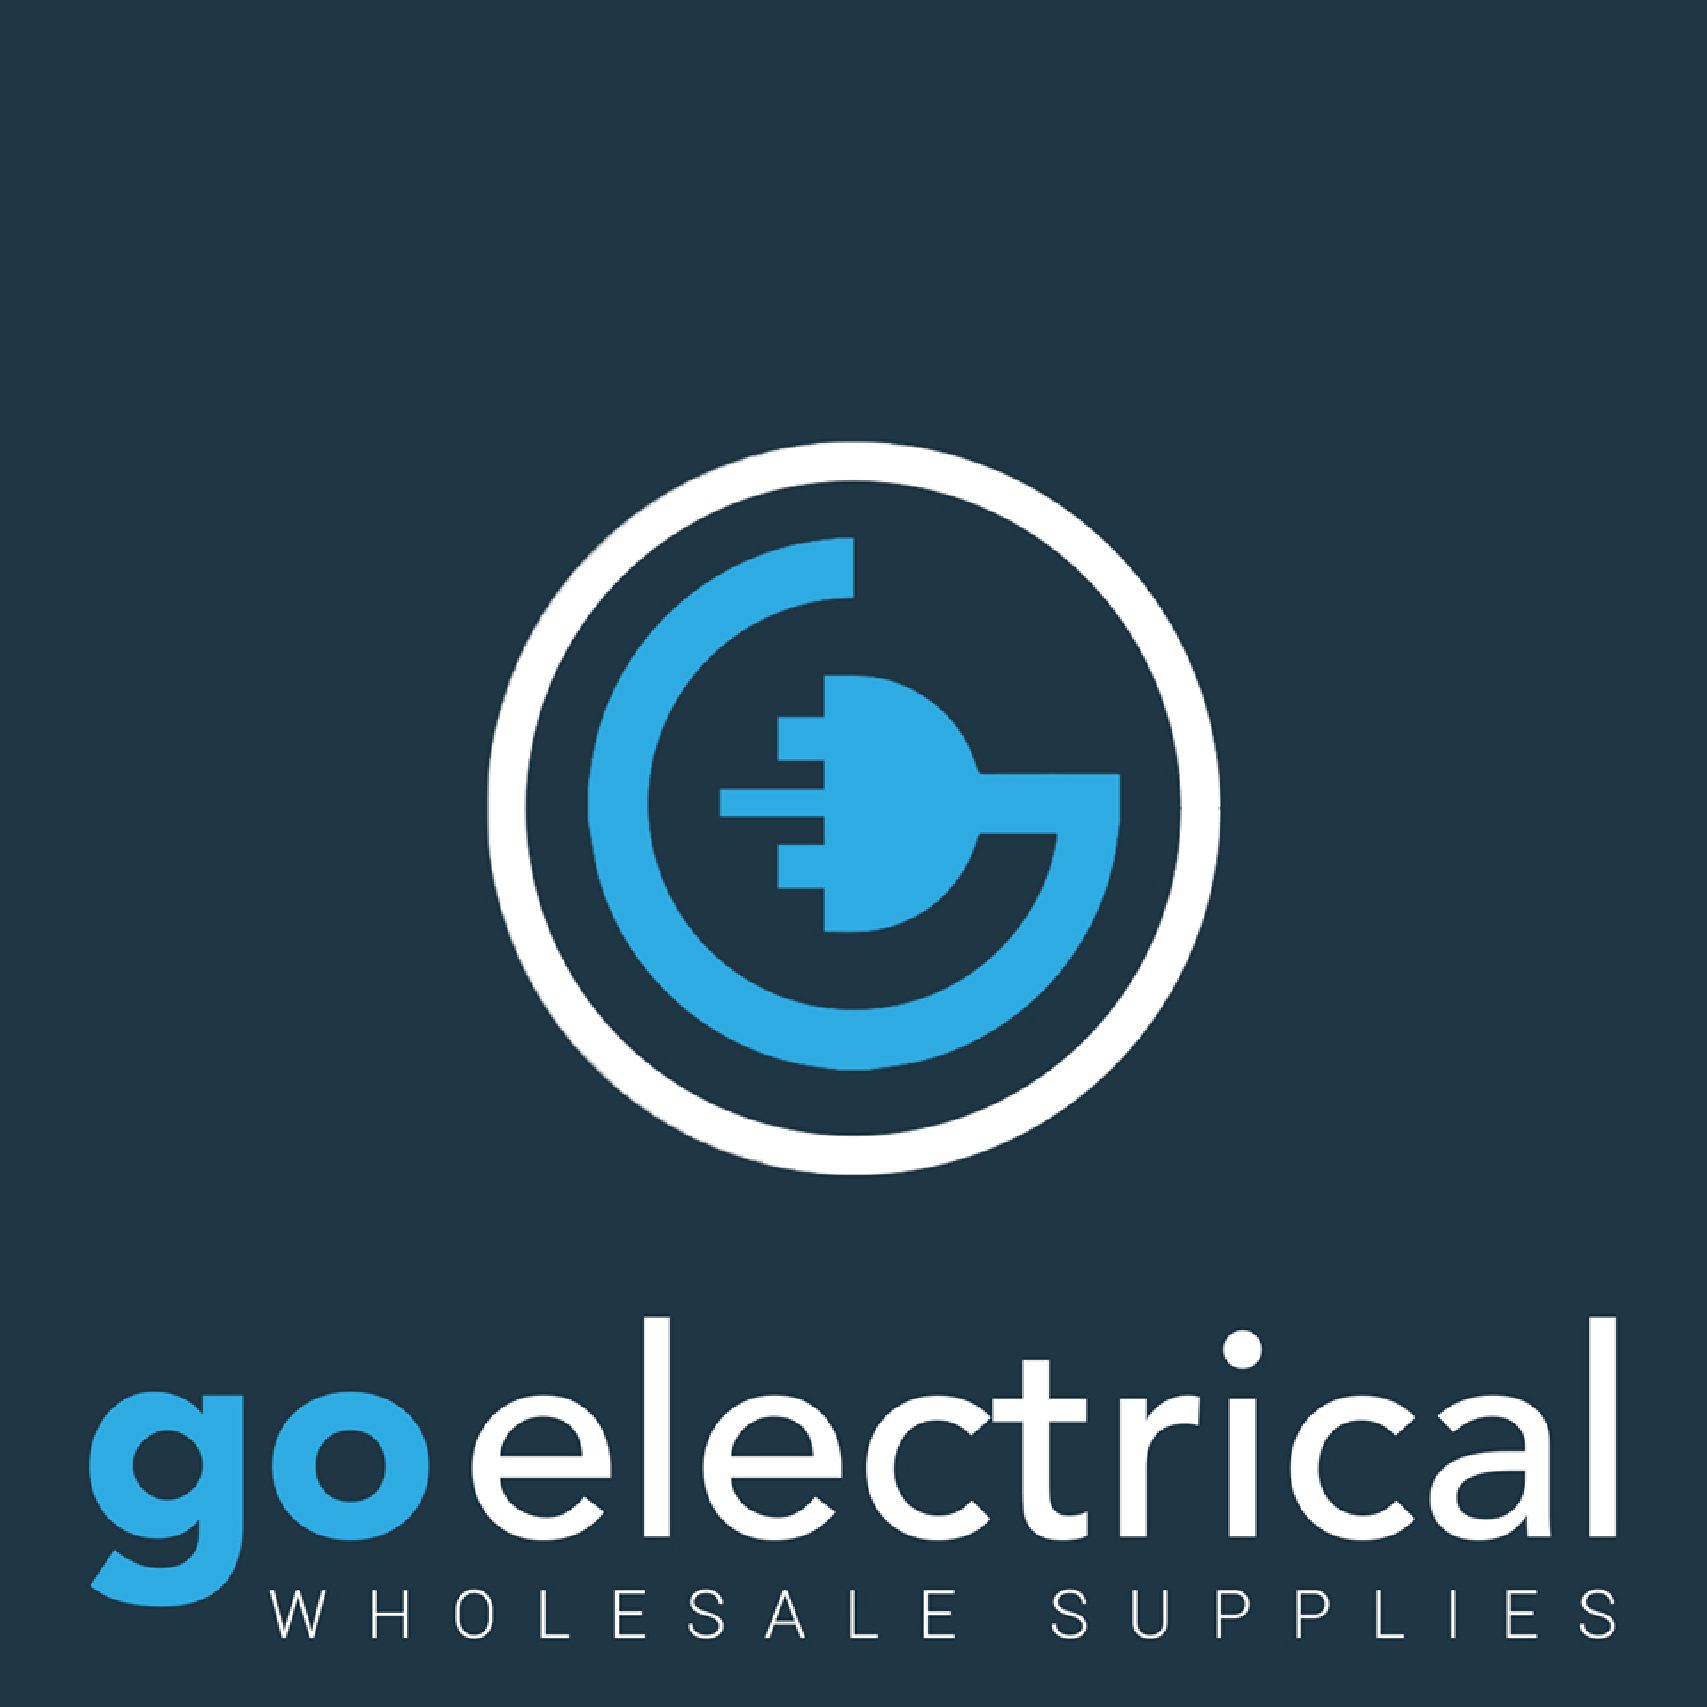 Go Electrical Wholesale Supplies, Best Wholesaler: 2-5 Branches